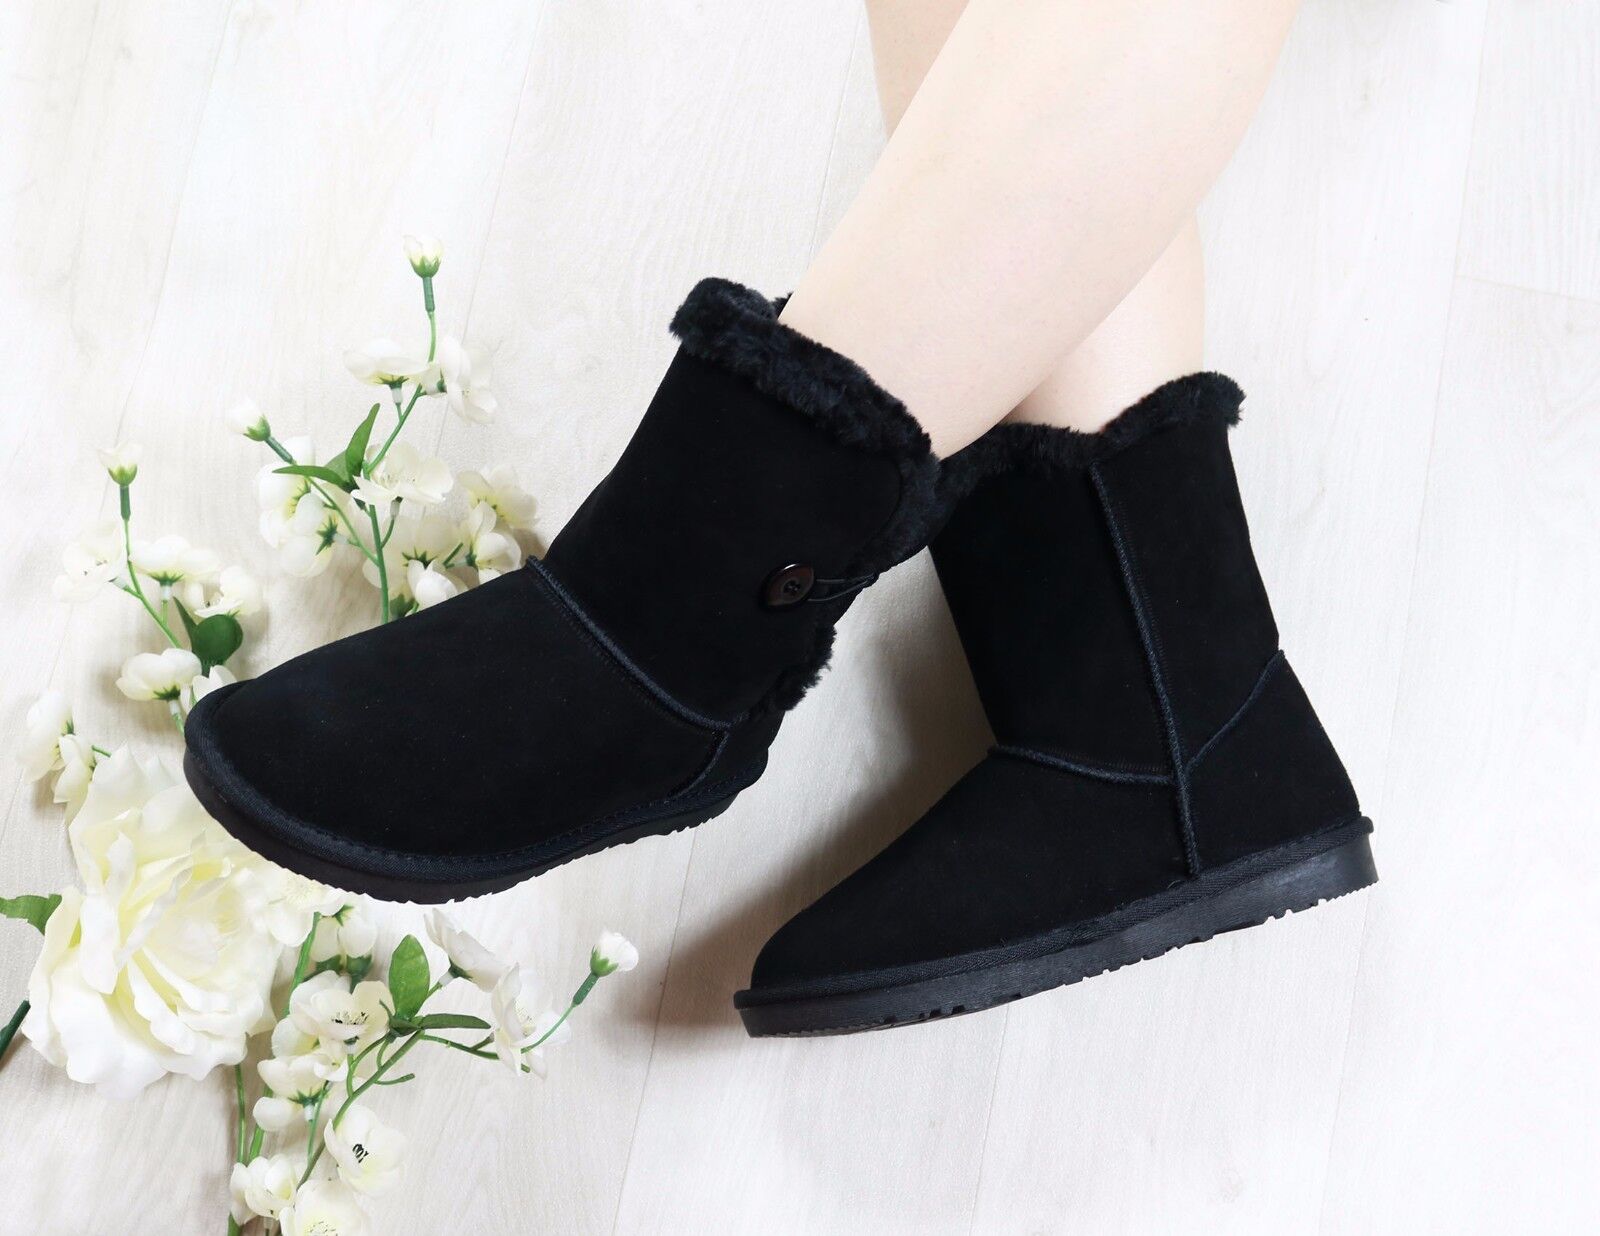 Women Ladies Real Leather Winter Warm Ankle Snow Boots Fur Lined Flat ...